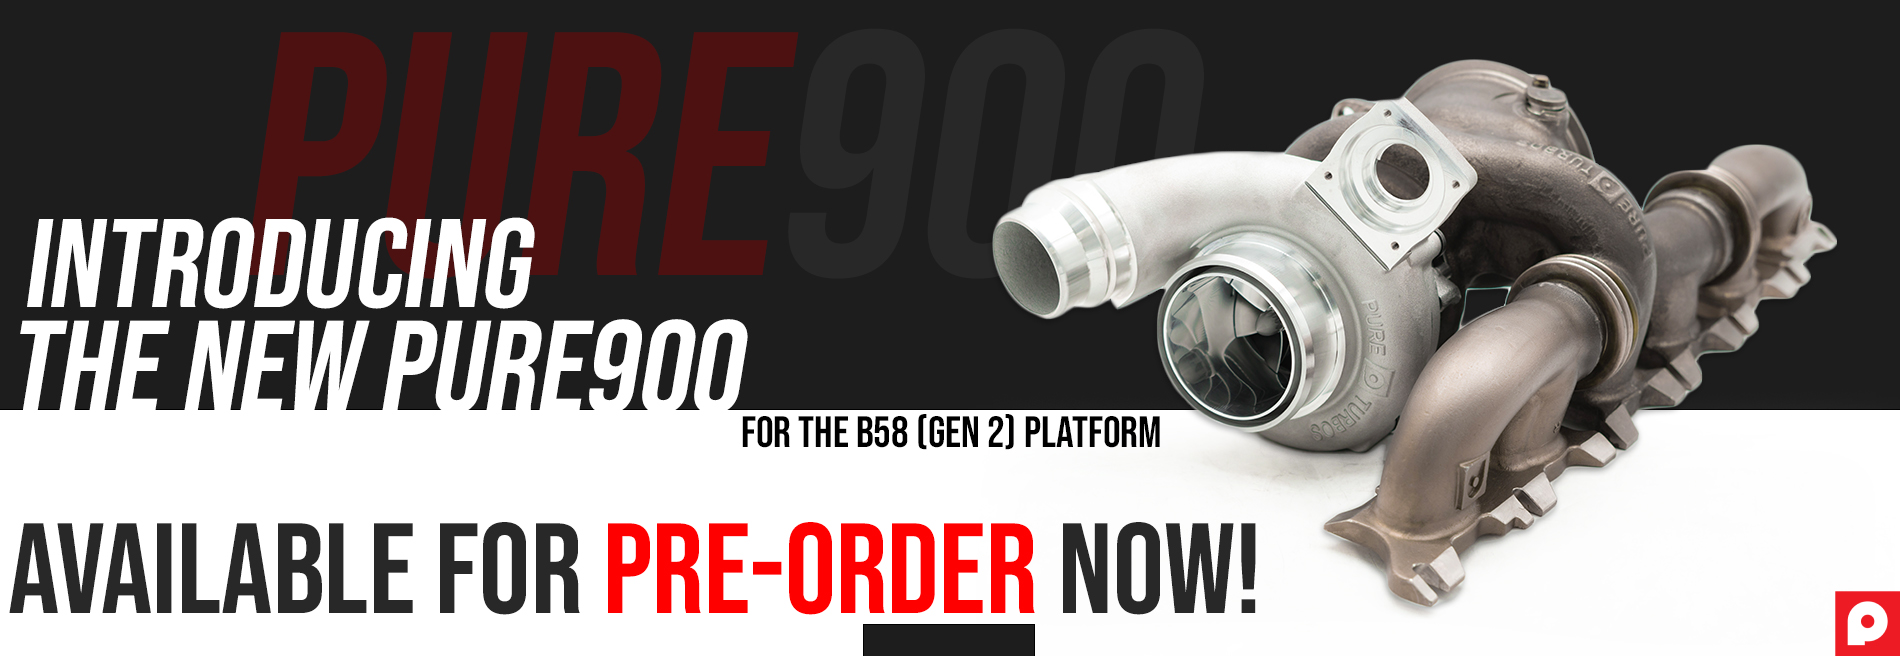 PureTurbos Pre Order Pure900 B58 Gen 2 Available Now